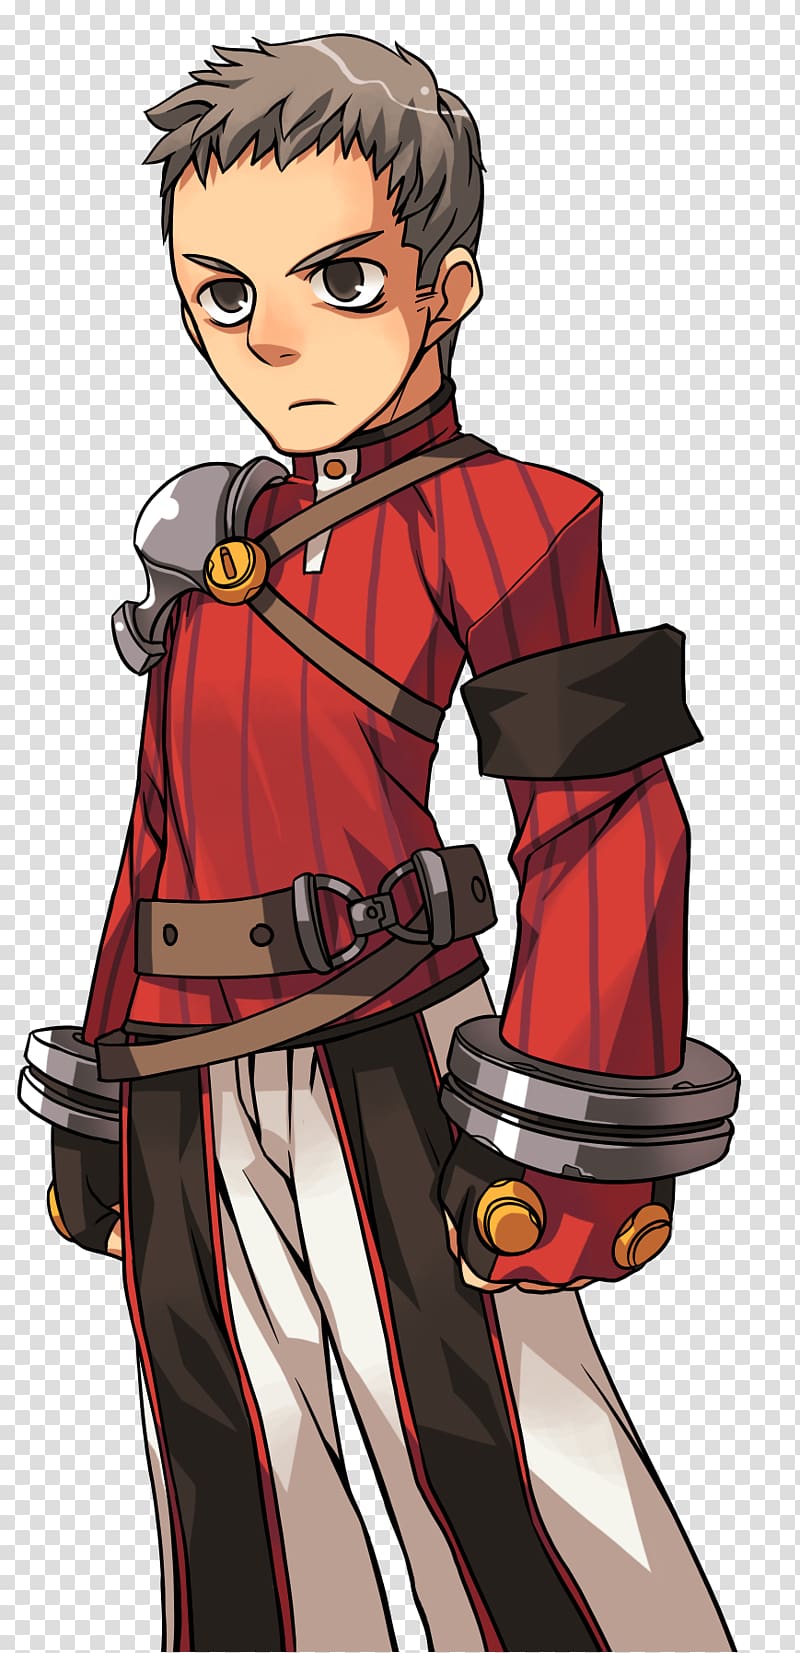 Elsword Fiction Game Non-player character, Lord Knight transparent background PNG clipart